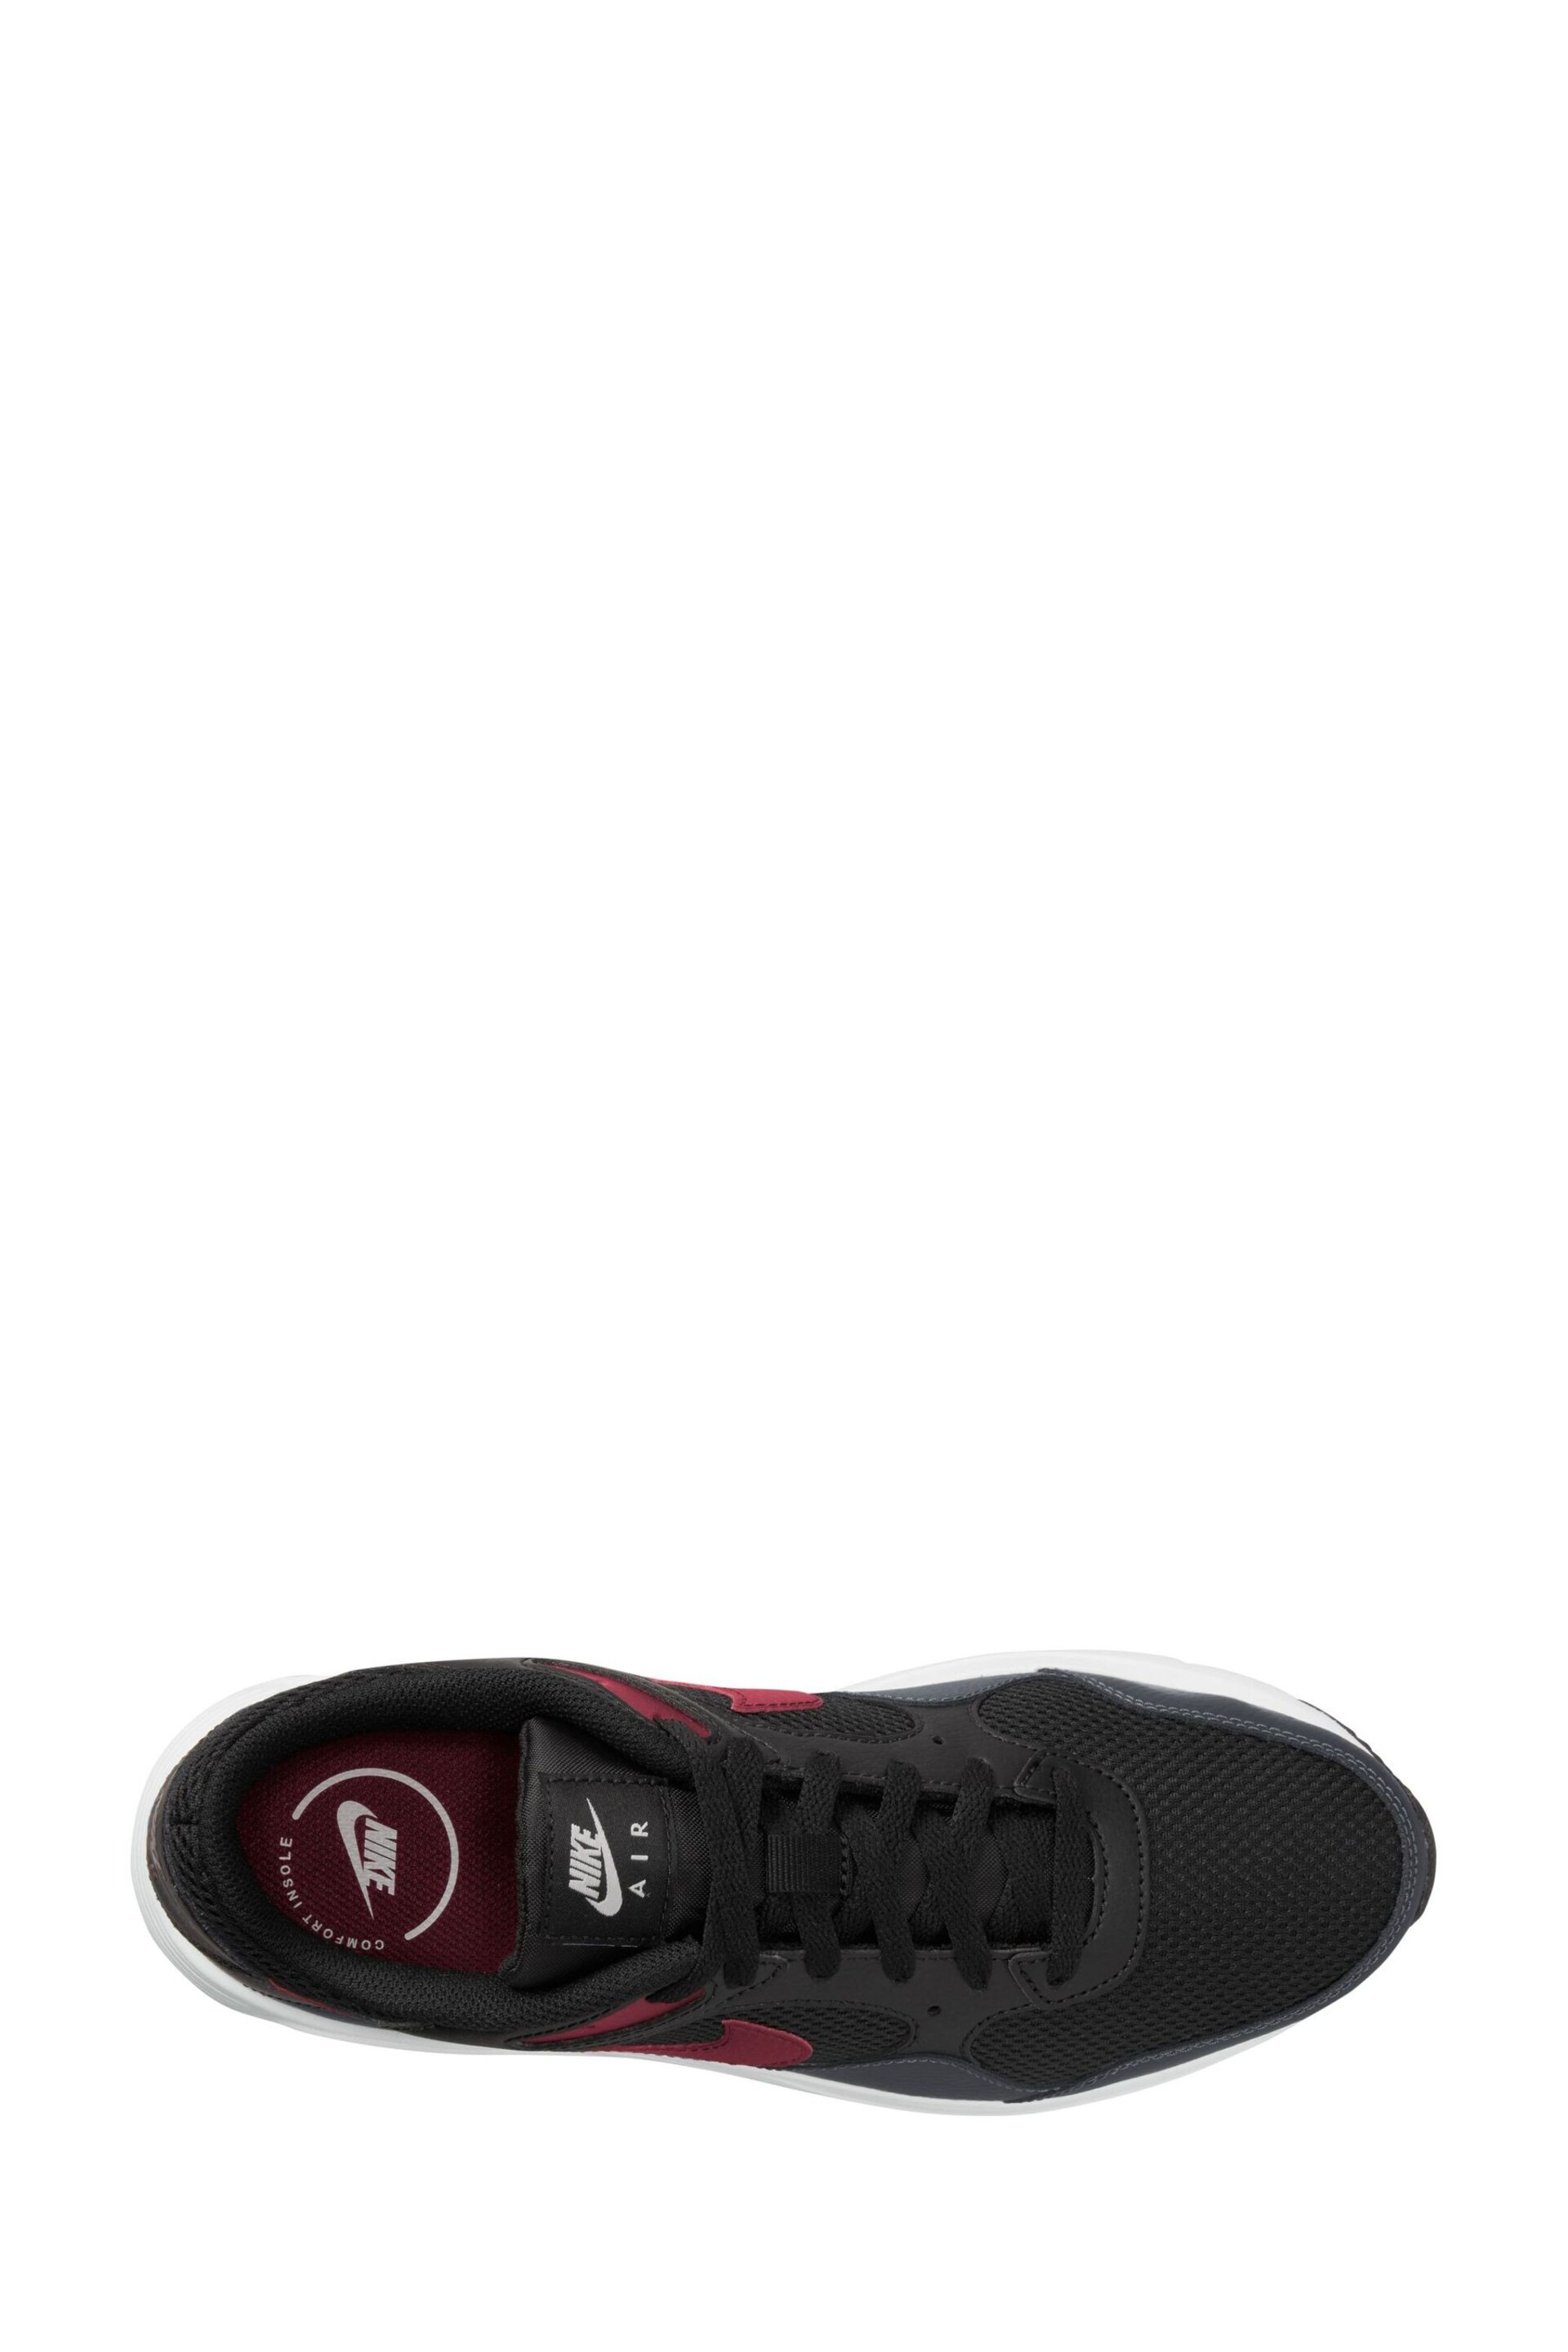 Nike Black/Red Air Max SC Trainers - Image 3 of 4